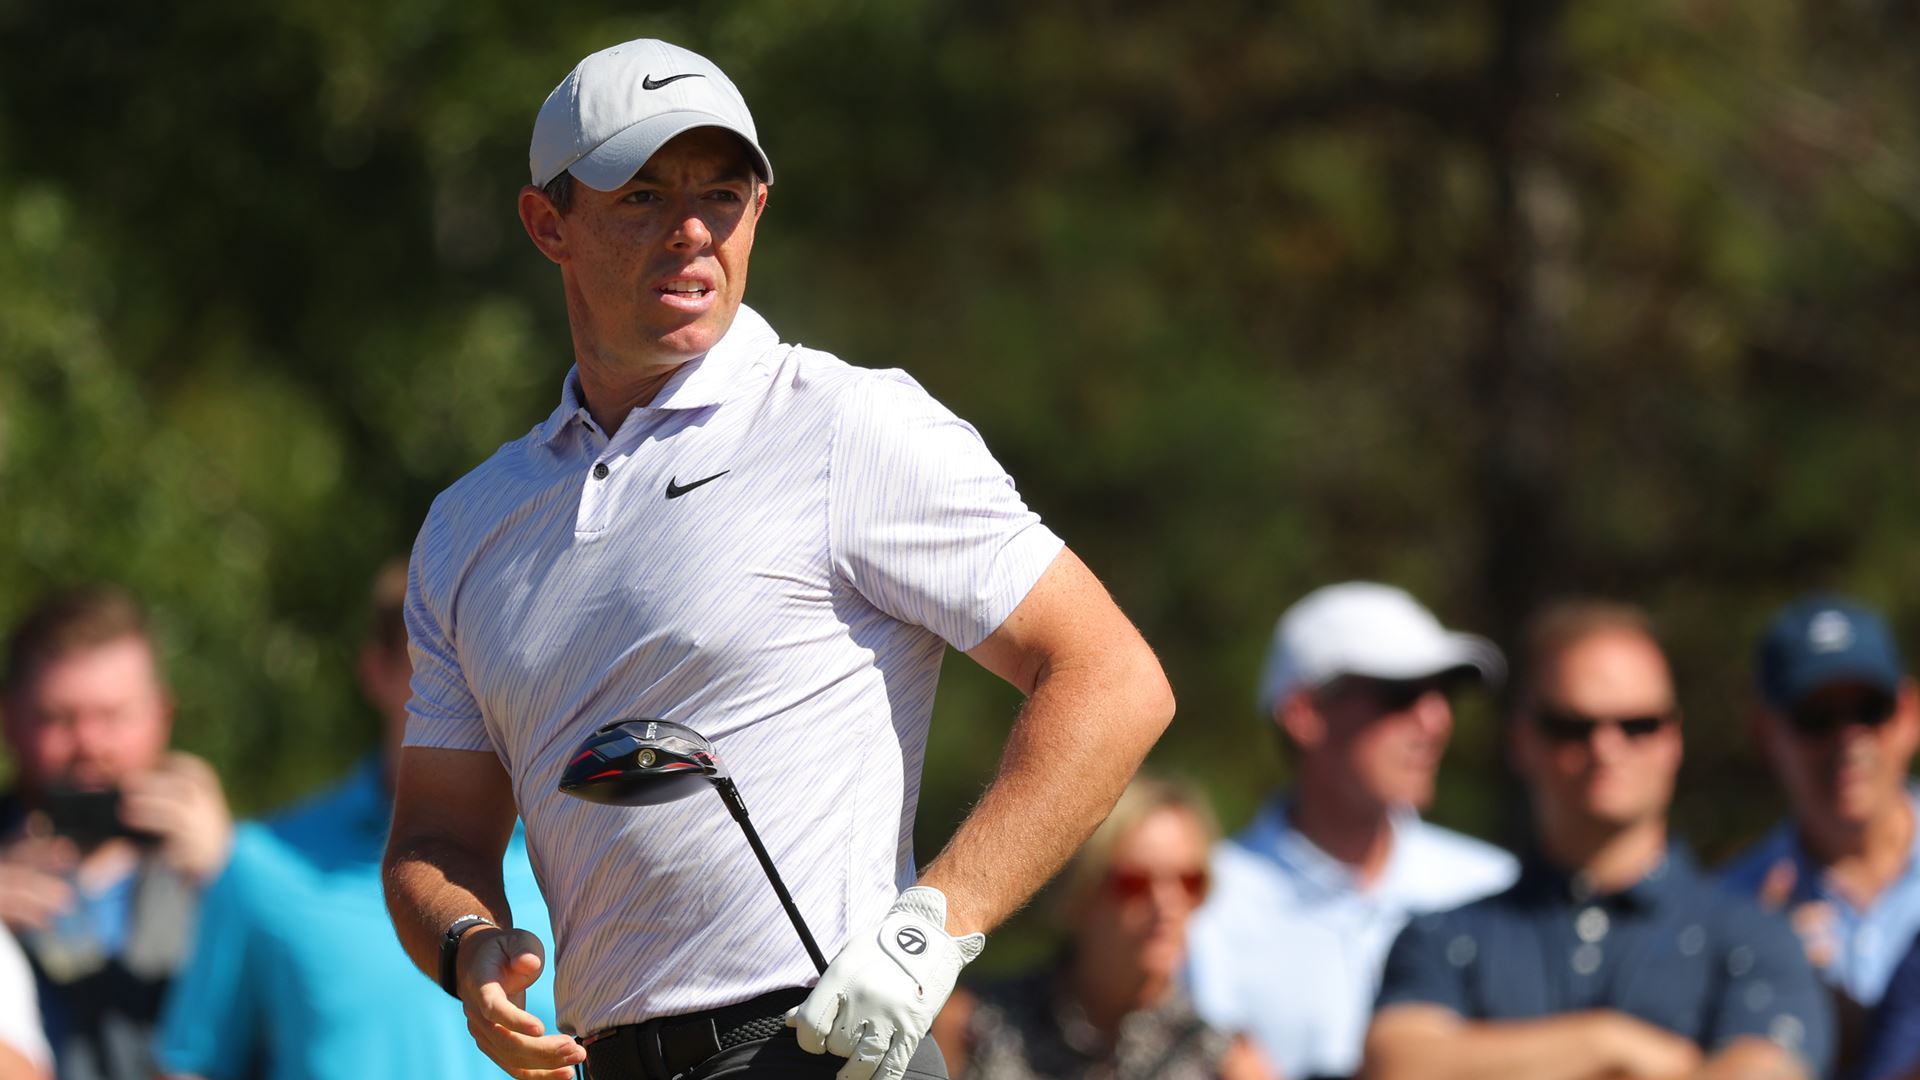 Rory McIlroy Rises to World No. 1 for Ninth Time in Career After Repeat Win at THE CJ CUP with Stealth Plus Driver and TP5x Golf Ball